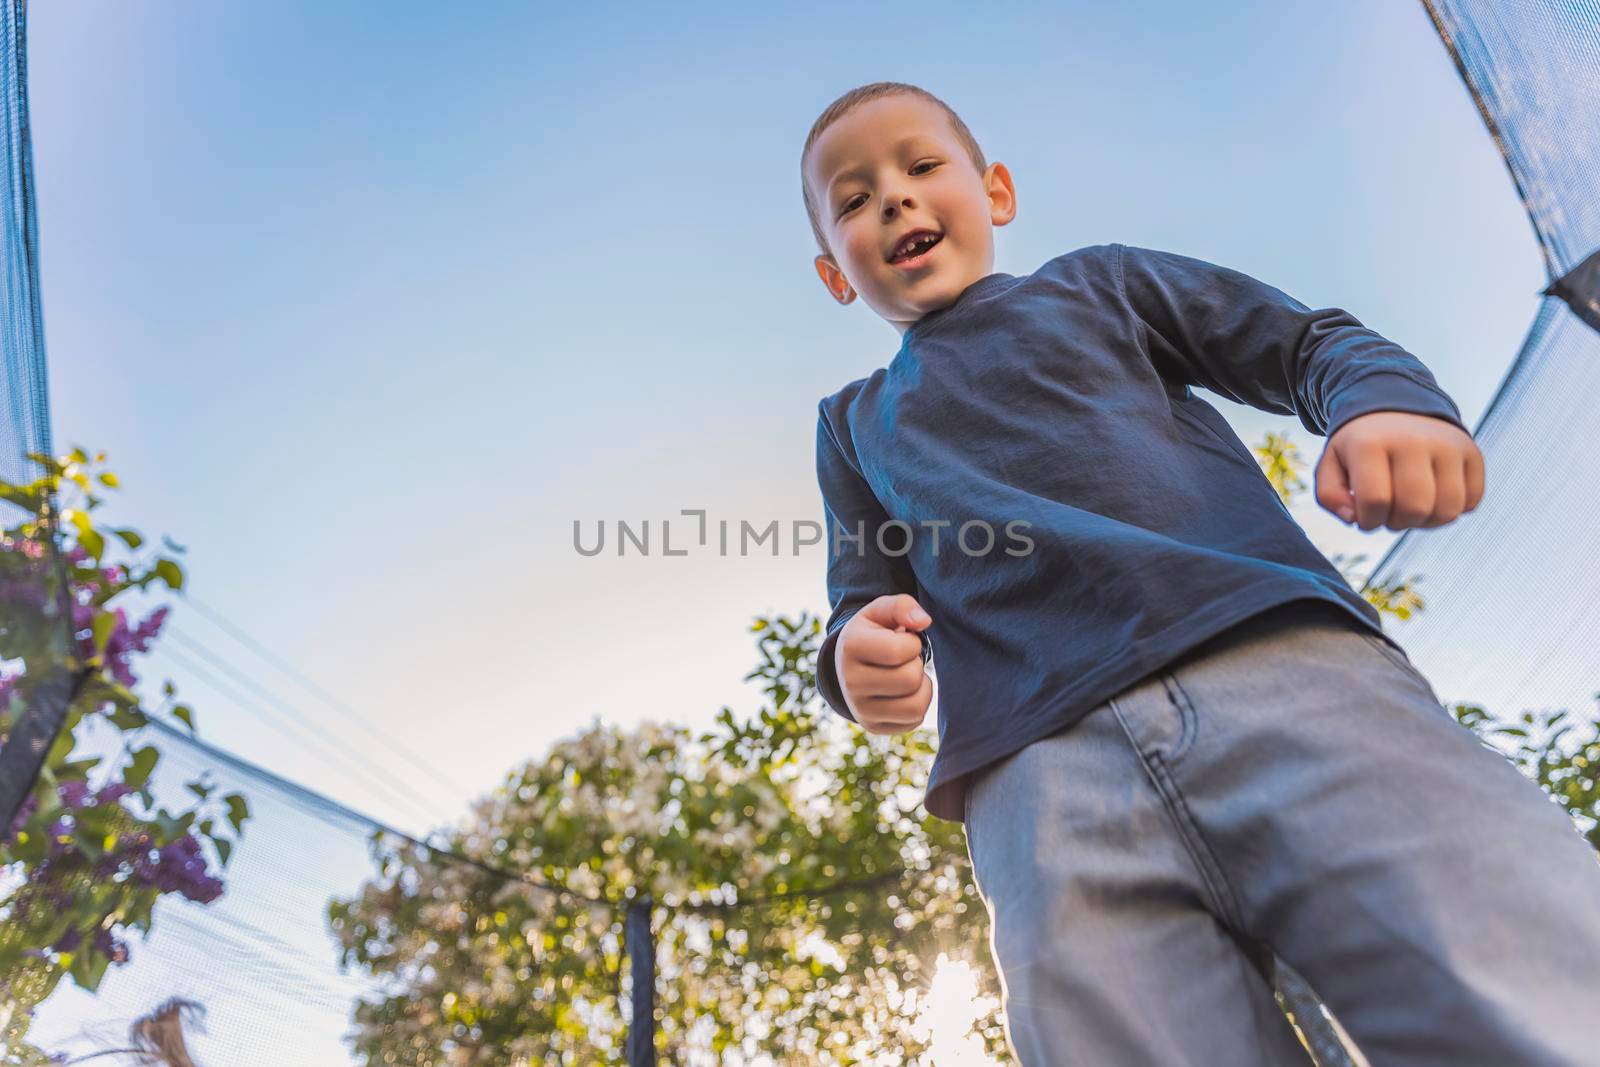 little boy jumps on a trampoline that stands in the yard